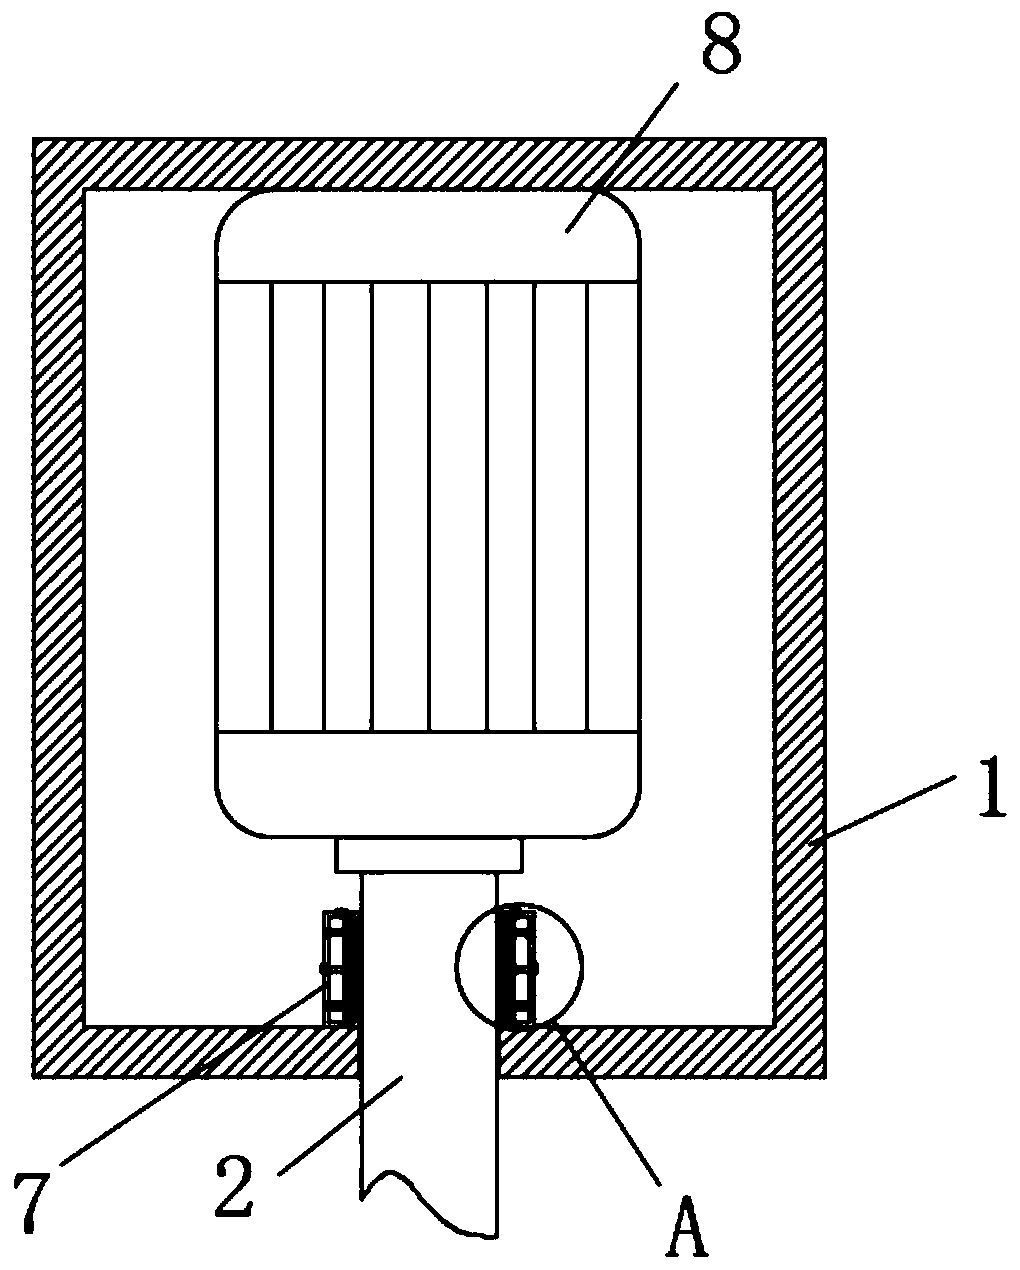 Soil sampling device for constructional engineering